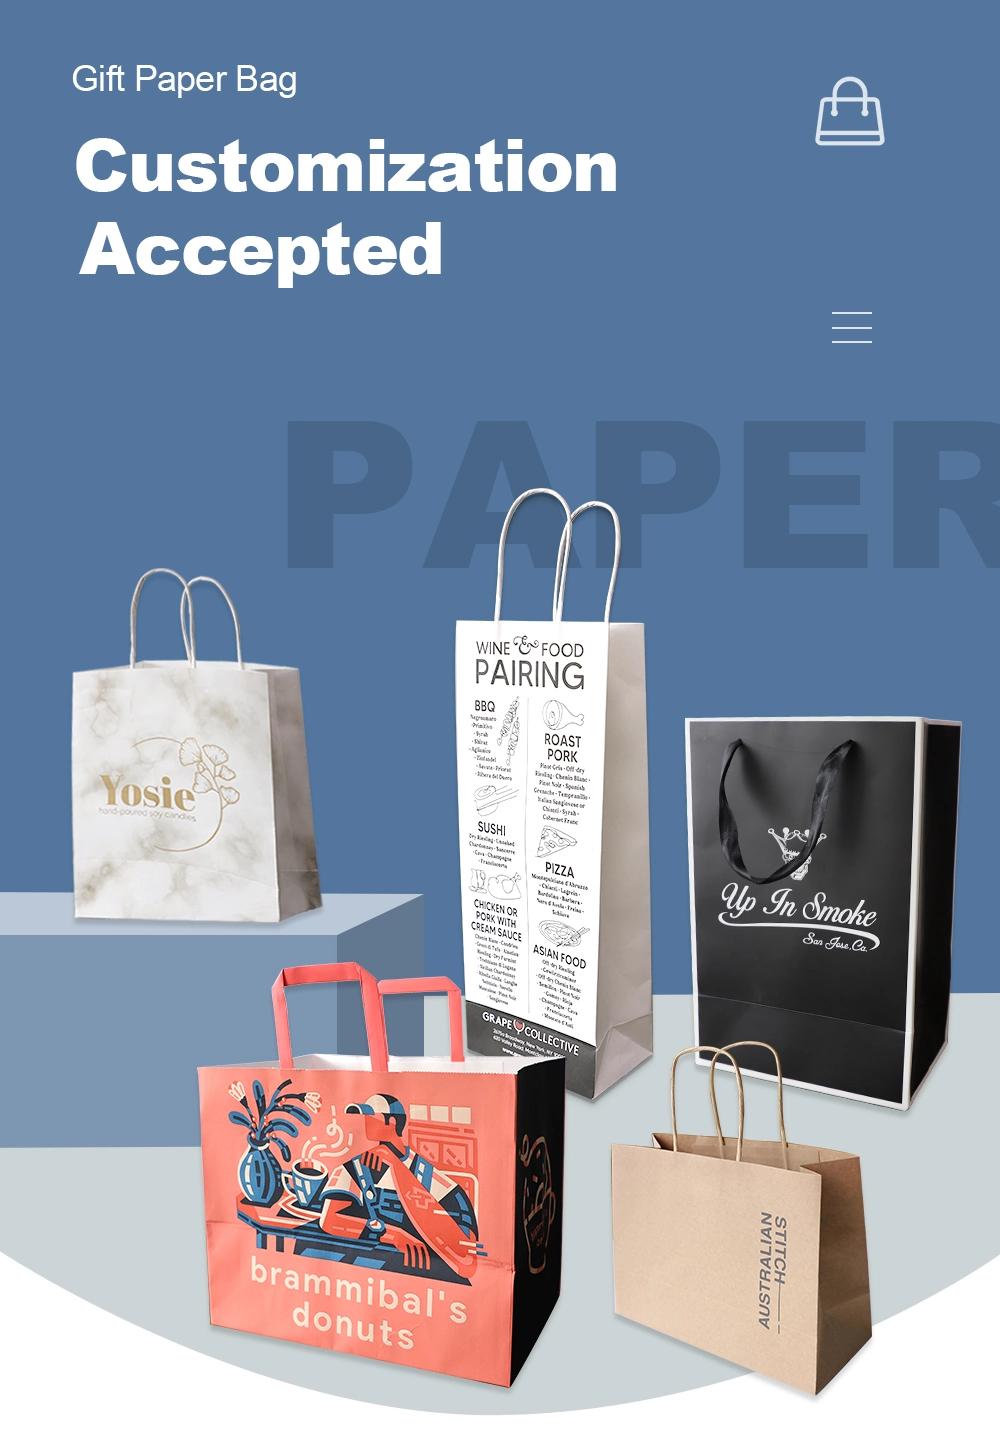 Clothes and Gifts Packaging Paper Bags Shop Supplies Pretty Design Shopping Bags